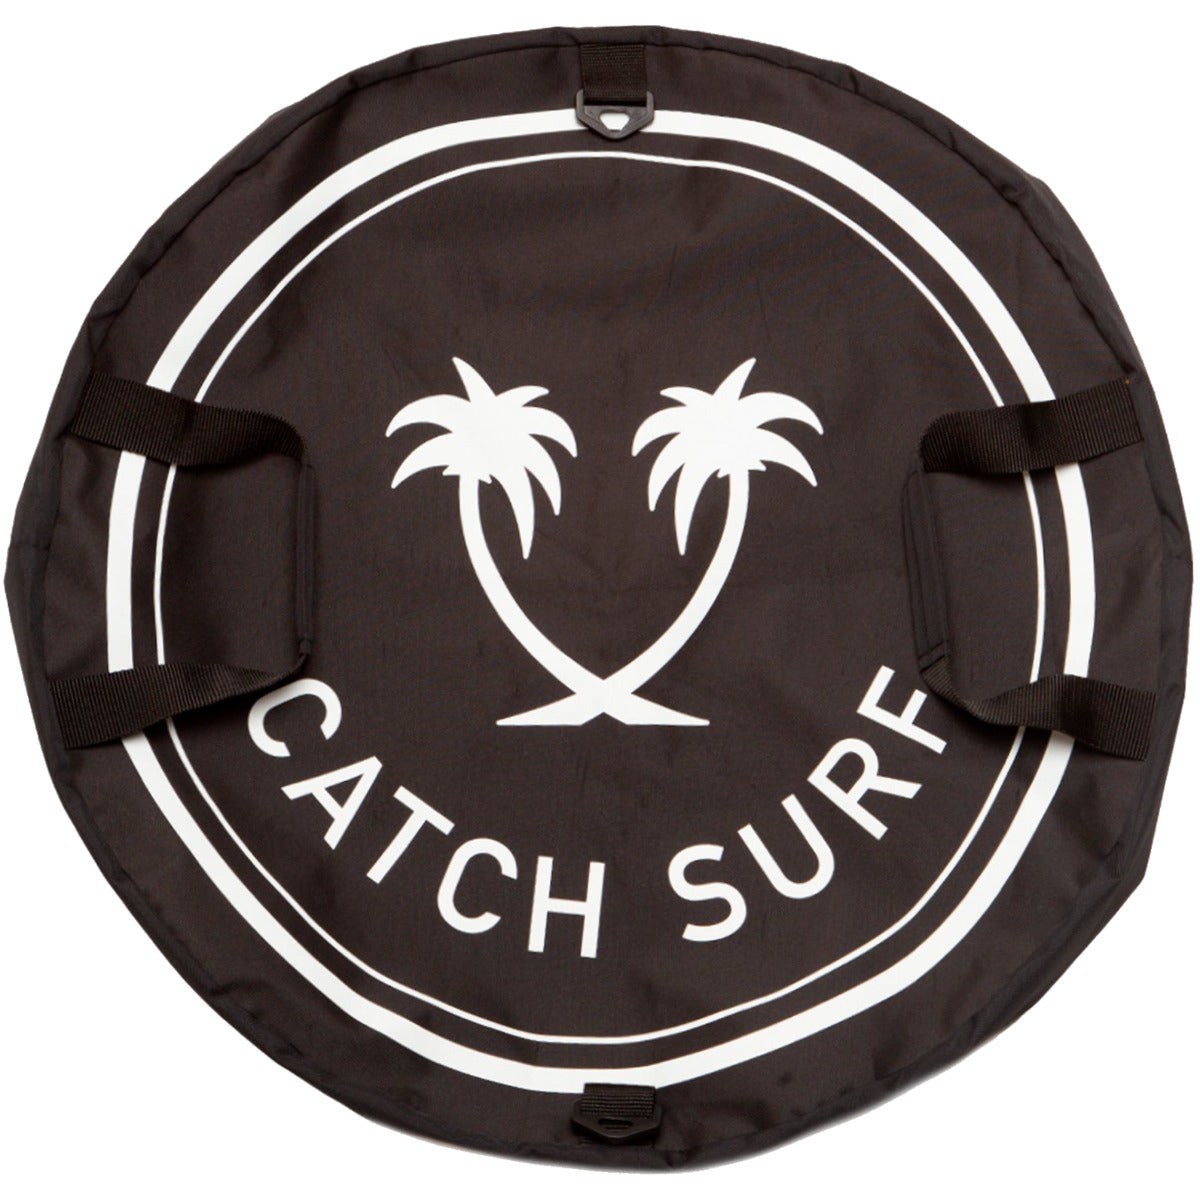 Catch Surf Changing Mat – Cleanline Surf